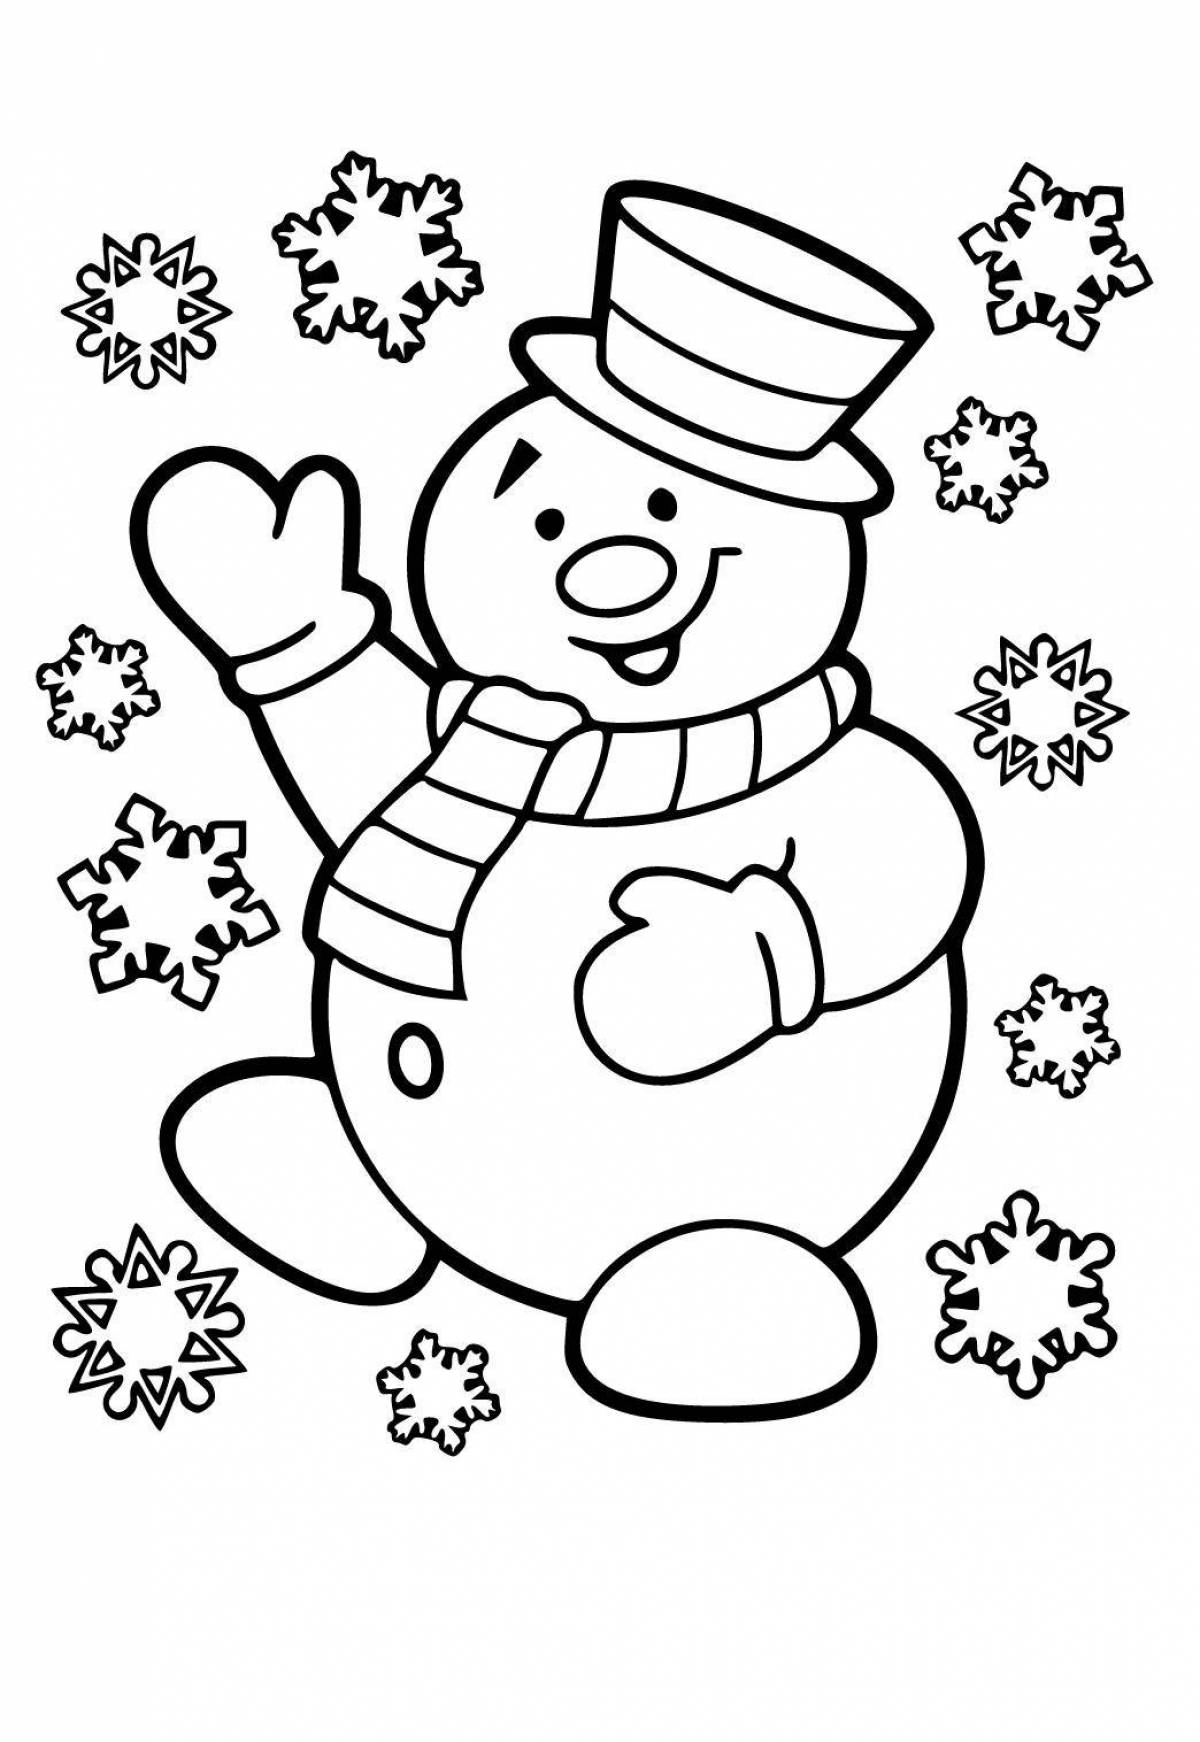 Adorable snowman skating coloring book for kids